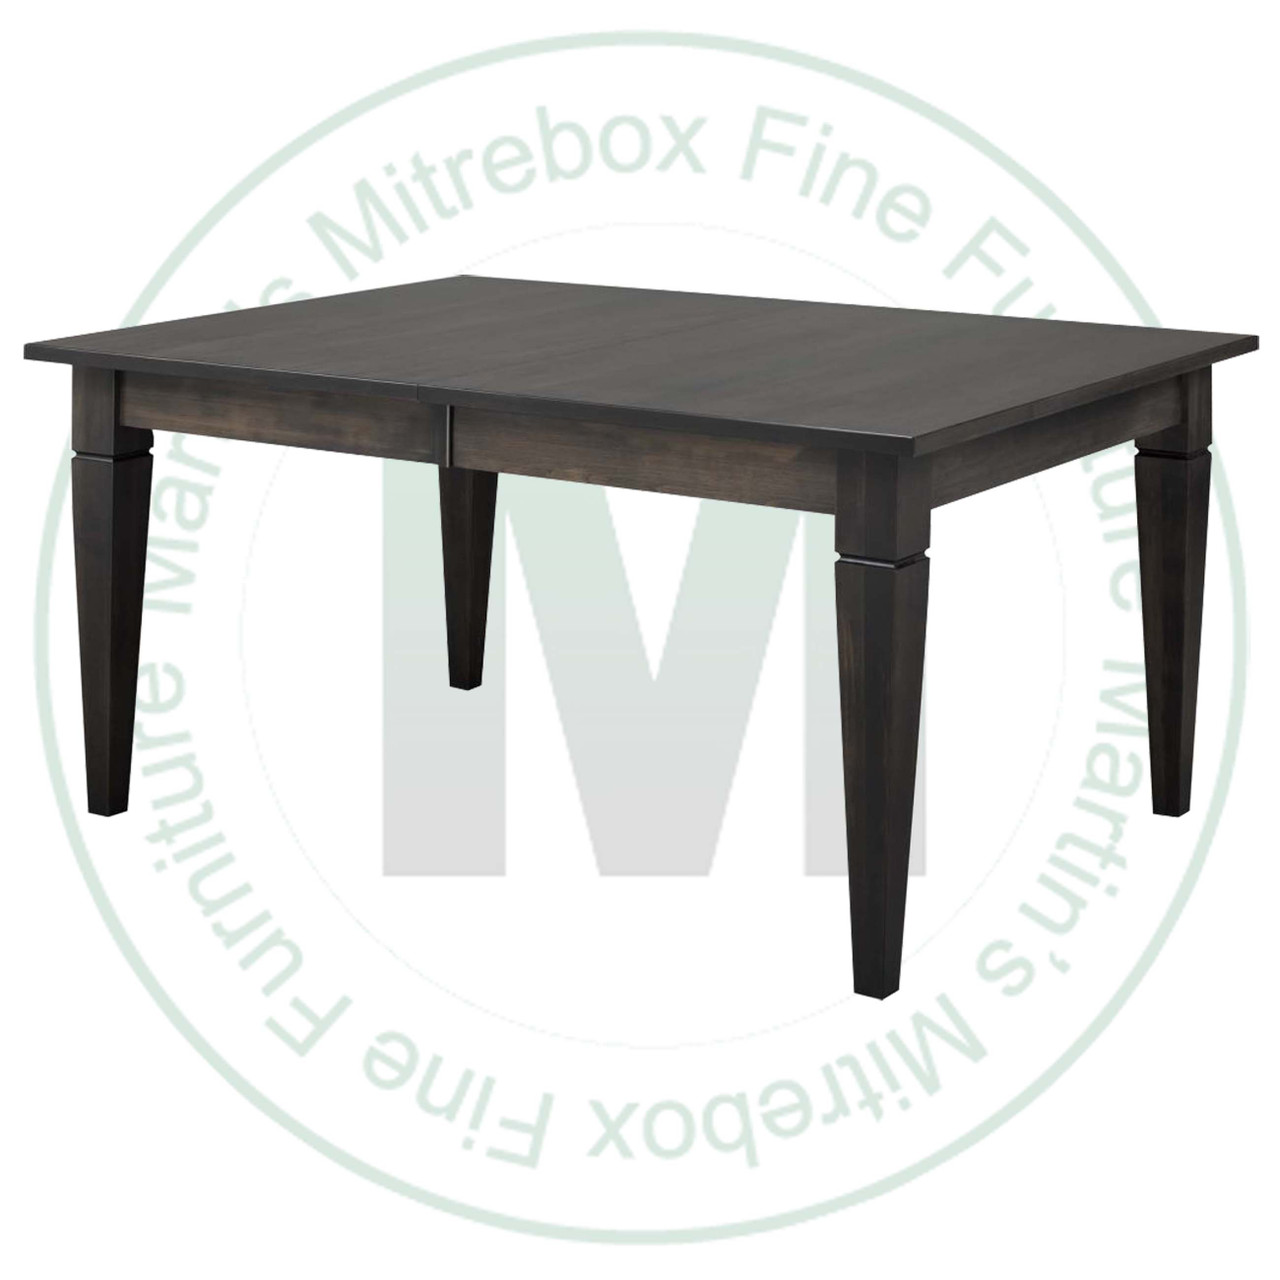 Maple Reesor Solid Top Harvest Table 42''D x 120''W x 30''H Table Has 1 3/4'' Thick Top And 2 - 16'' Extensions